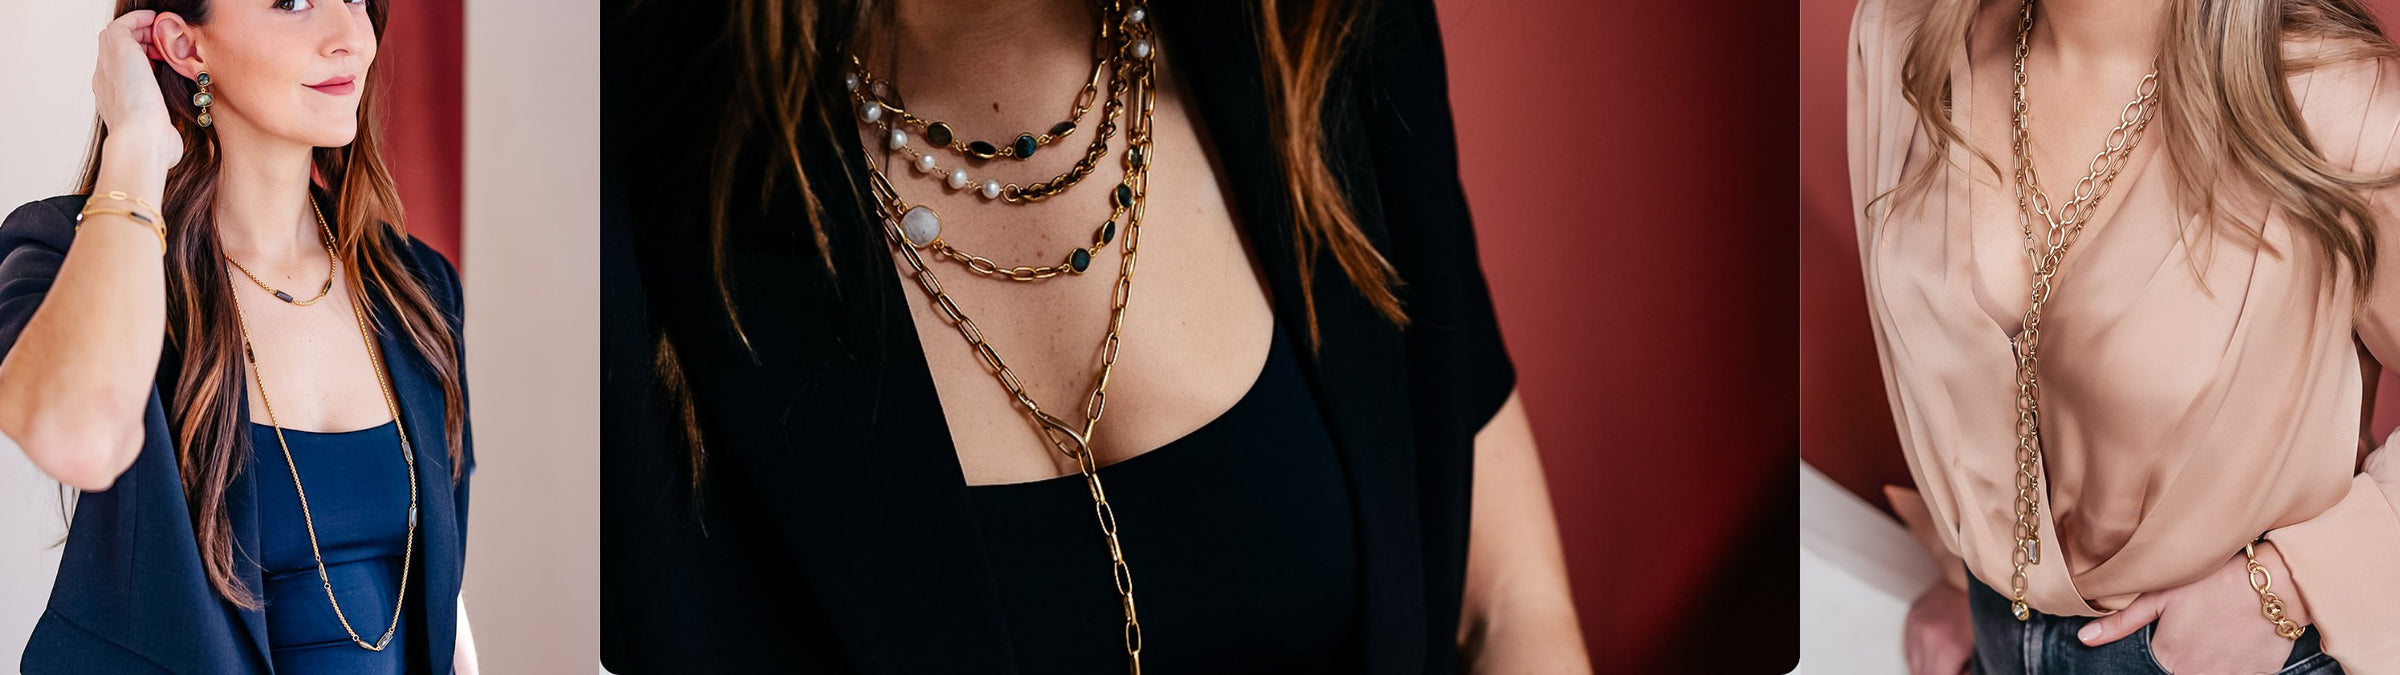 Women showcasing Loni Paul's exquisite long necklaces, adding elegance and charm to any outfit